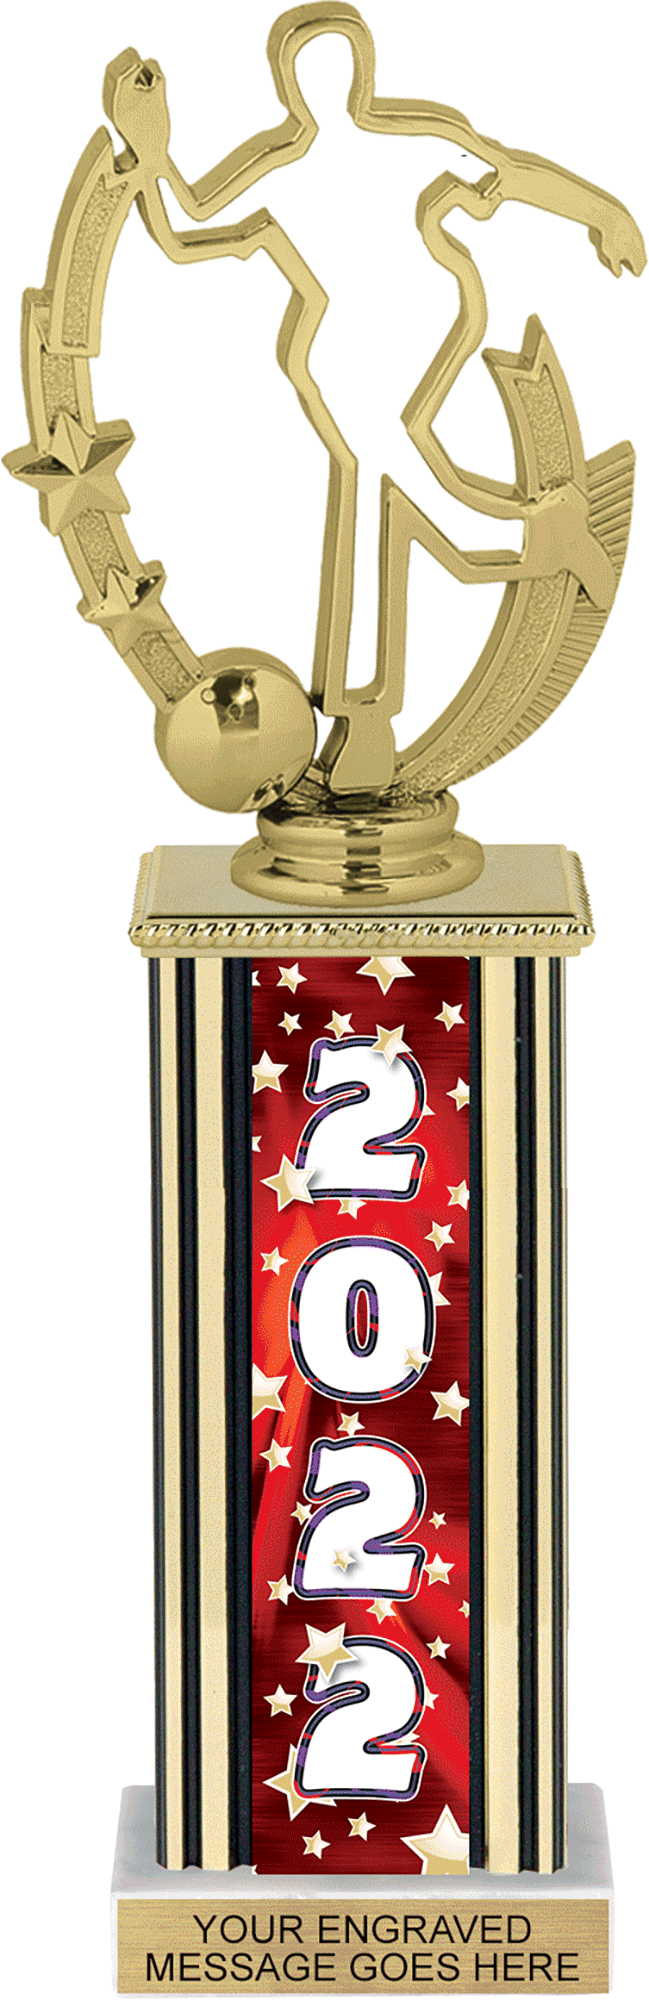 Year Glowing Stars Rectangle Column Trophy - Red 12 inch